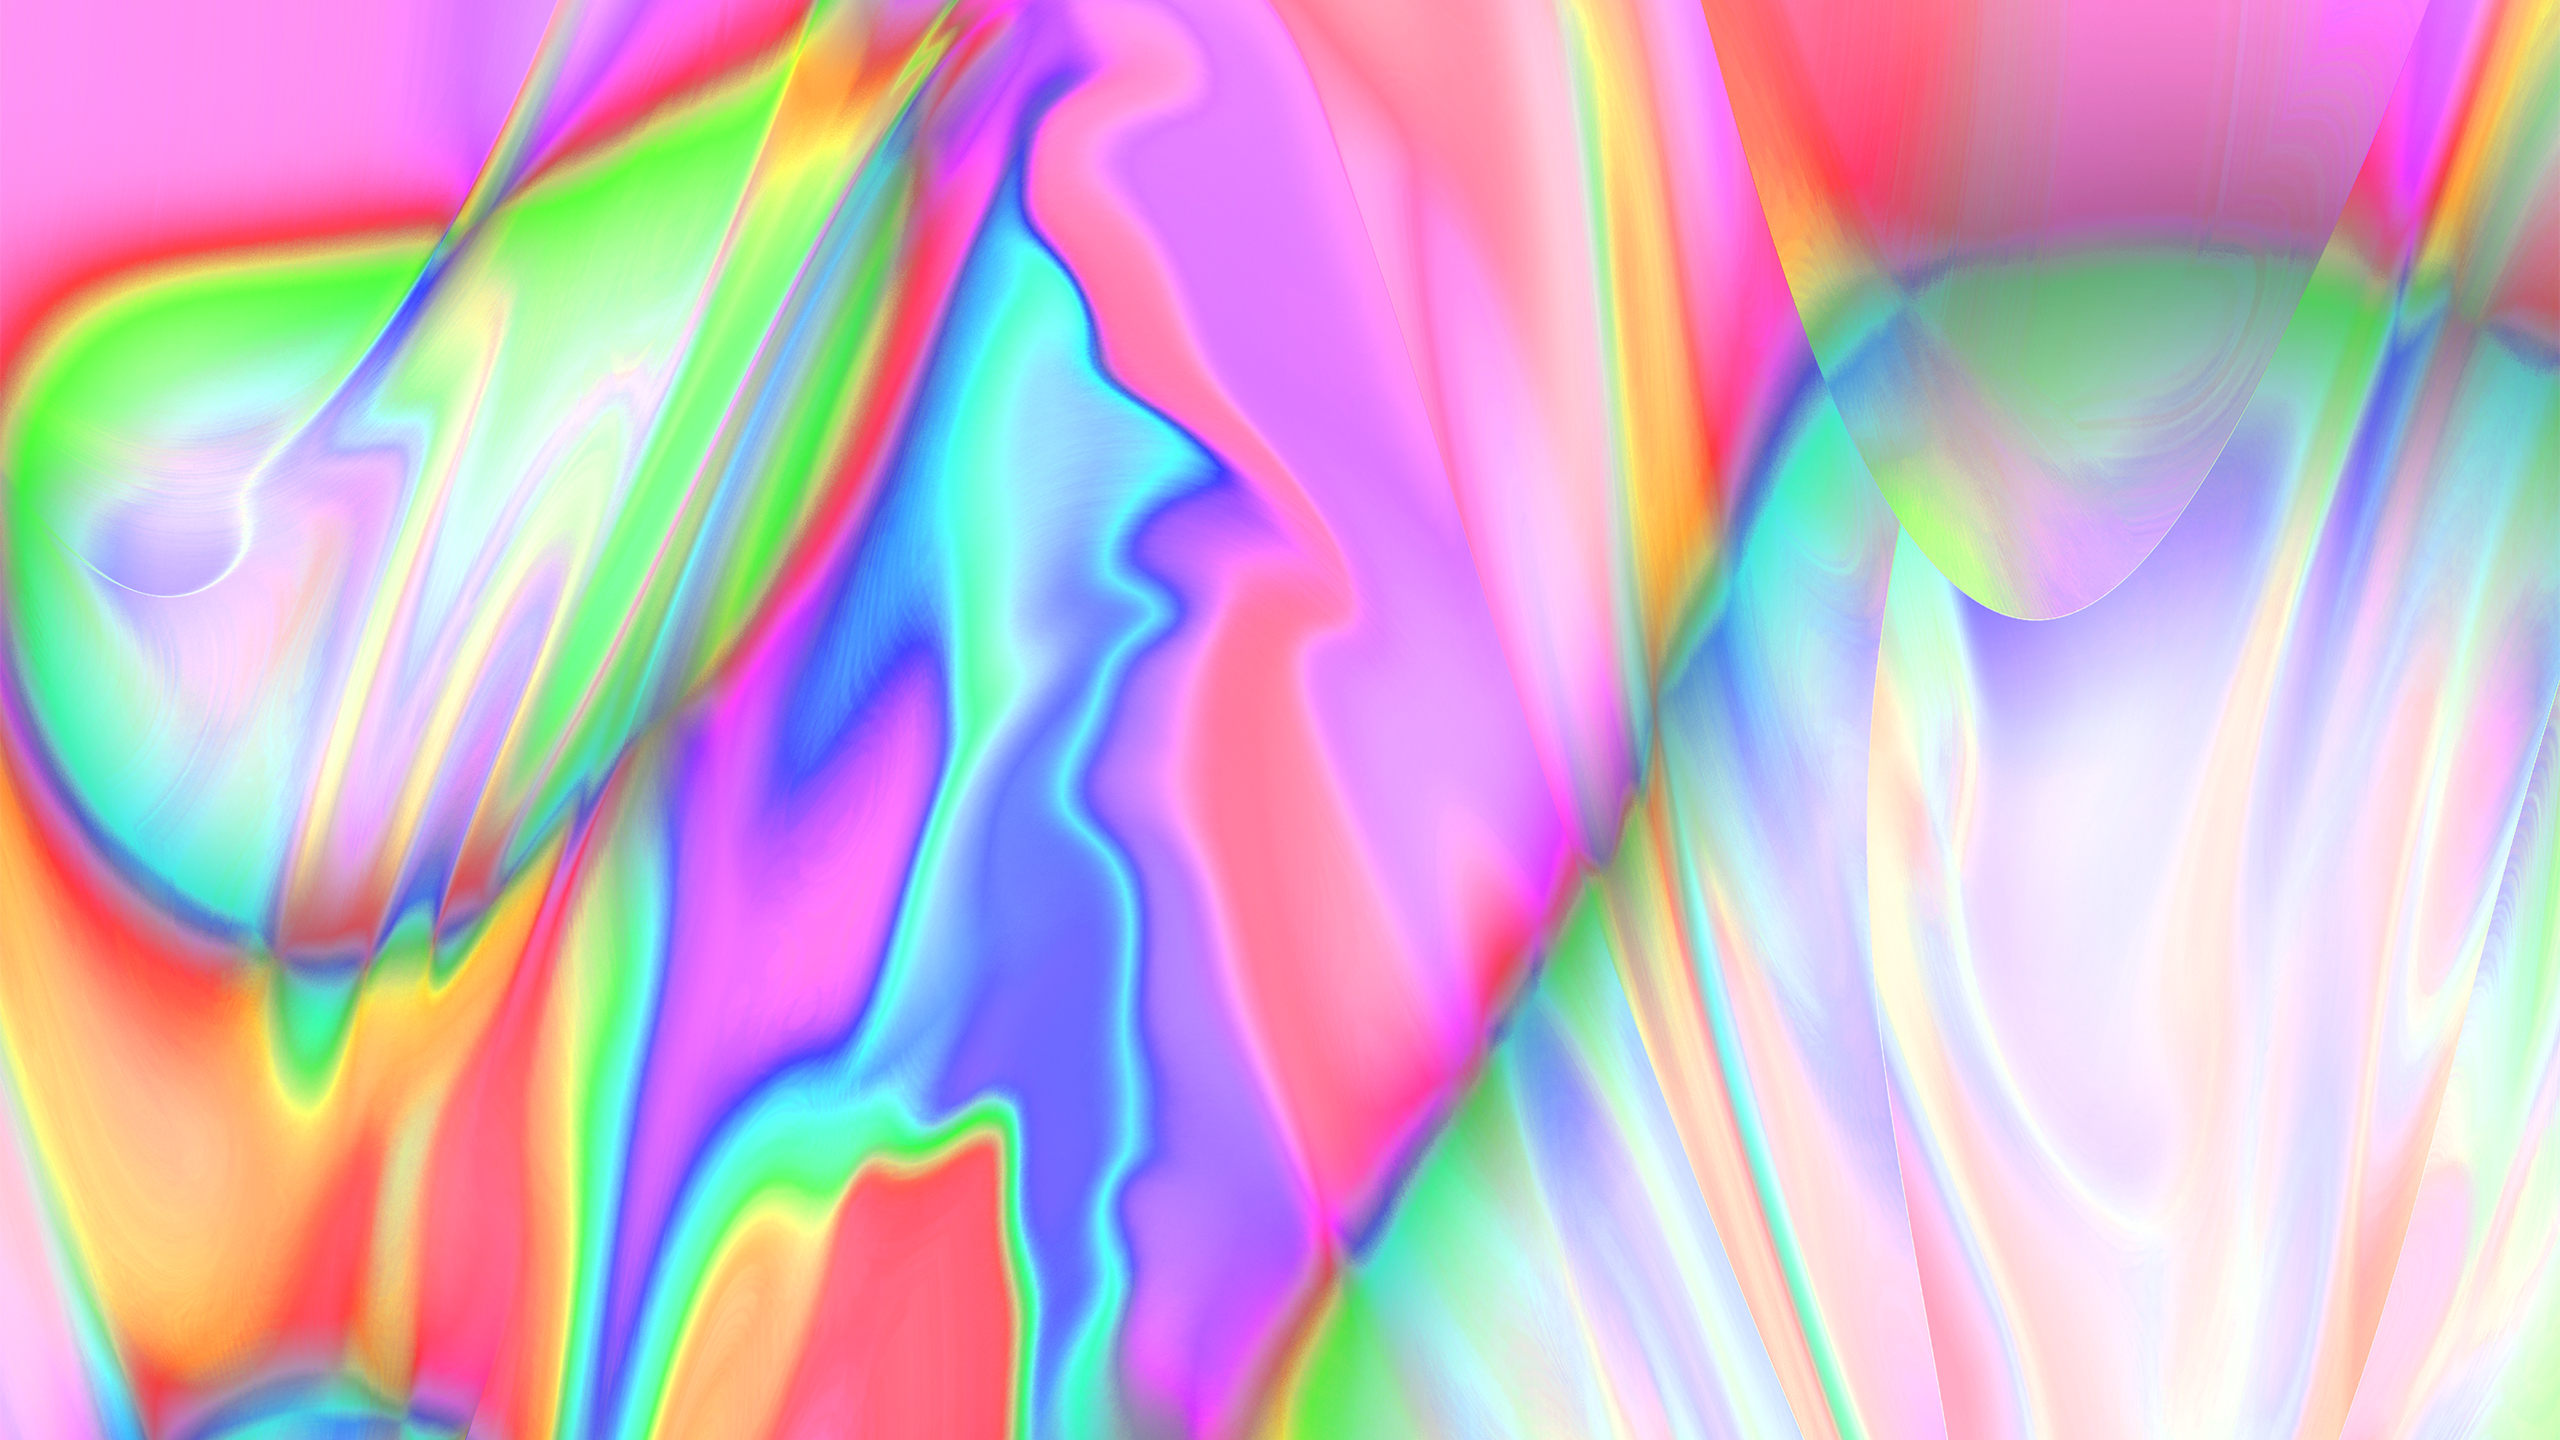 General 2560x1440 abstract photoshopped colorful holographic iridescent liquid gradient graphic design pink